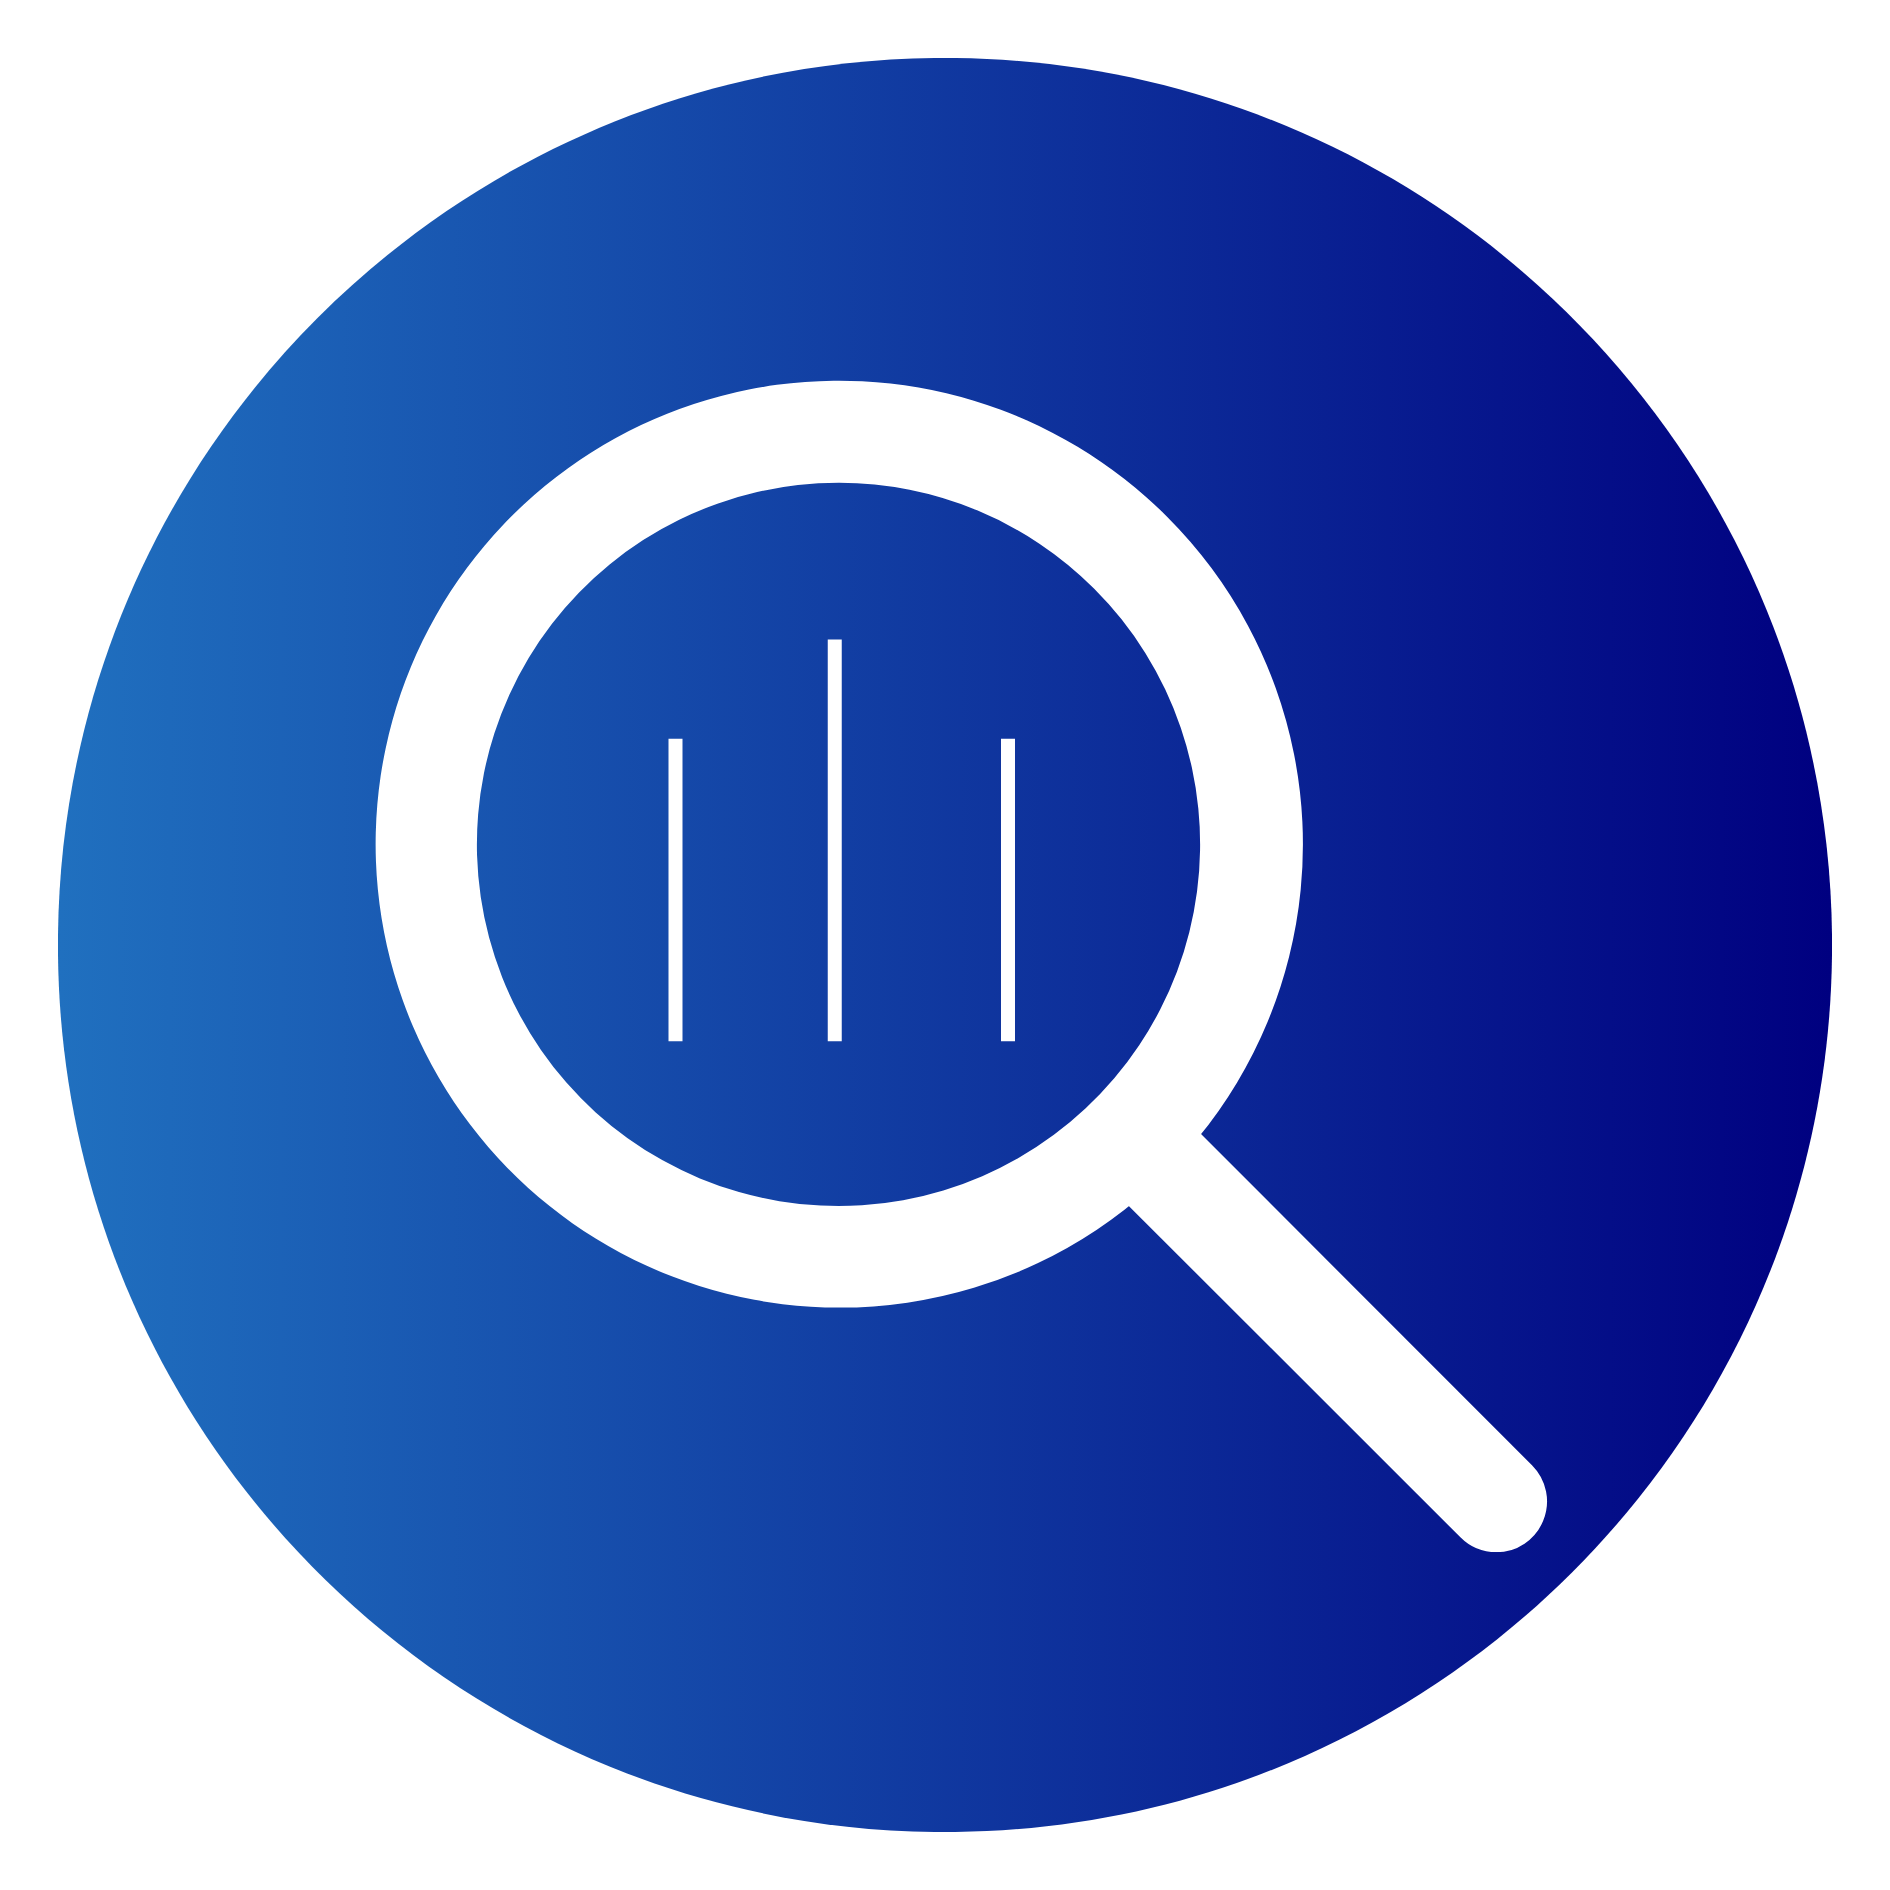 Magnifying glass image